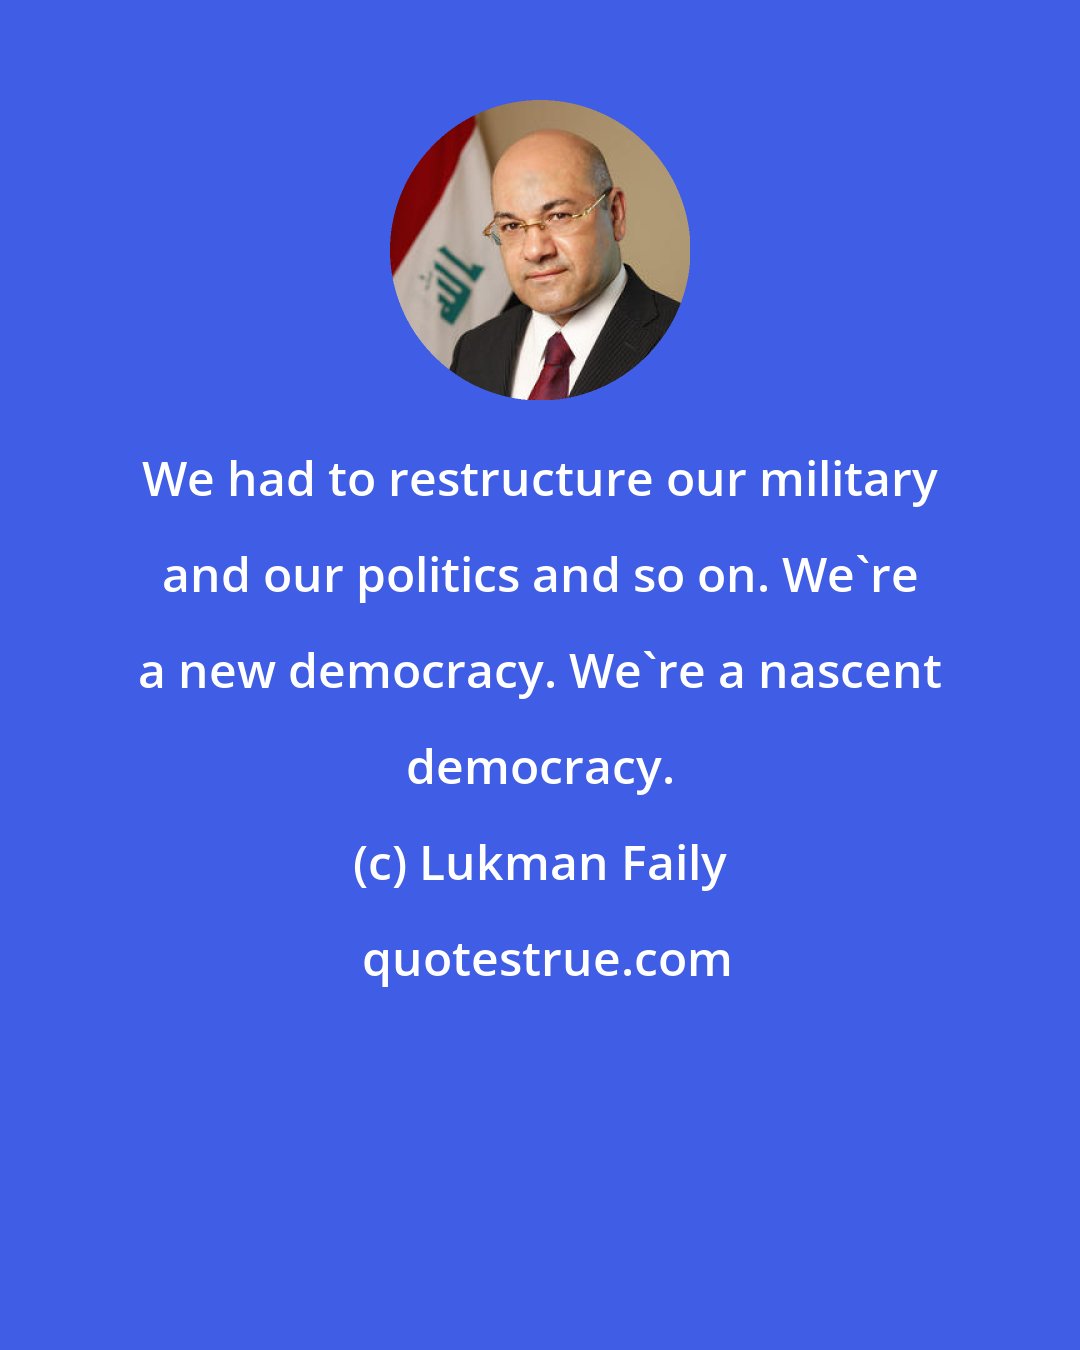 Lukman Faily: We had to restructure our military and our politics and so on. We're a new democracy. We're a nascent democracy.